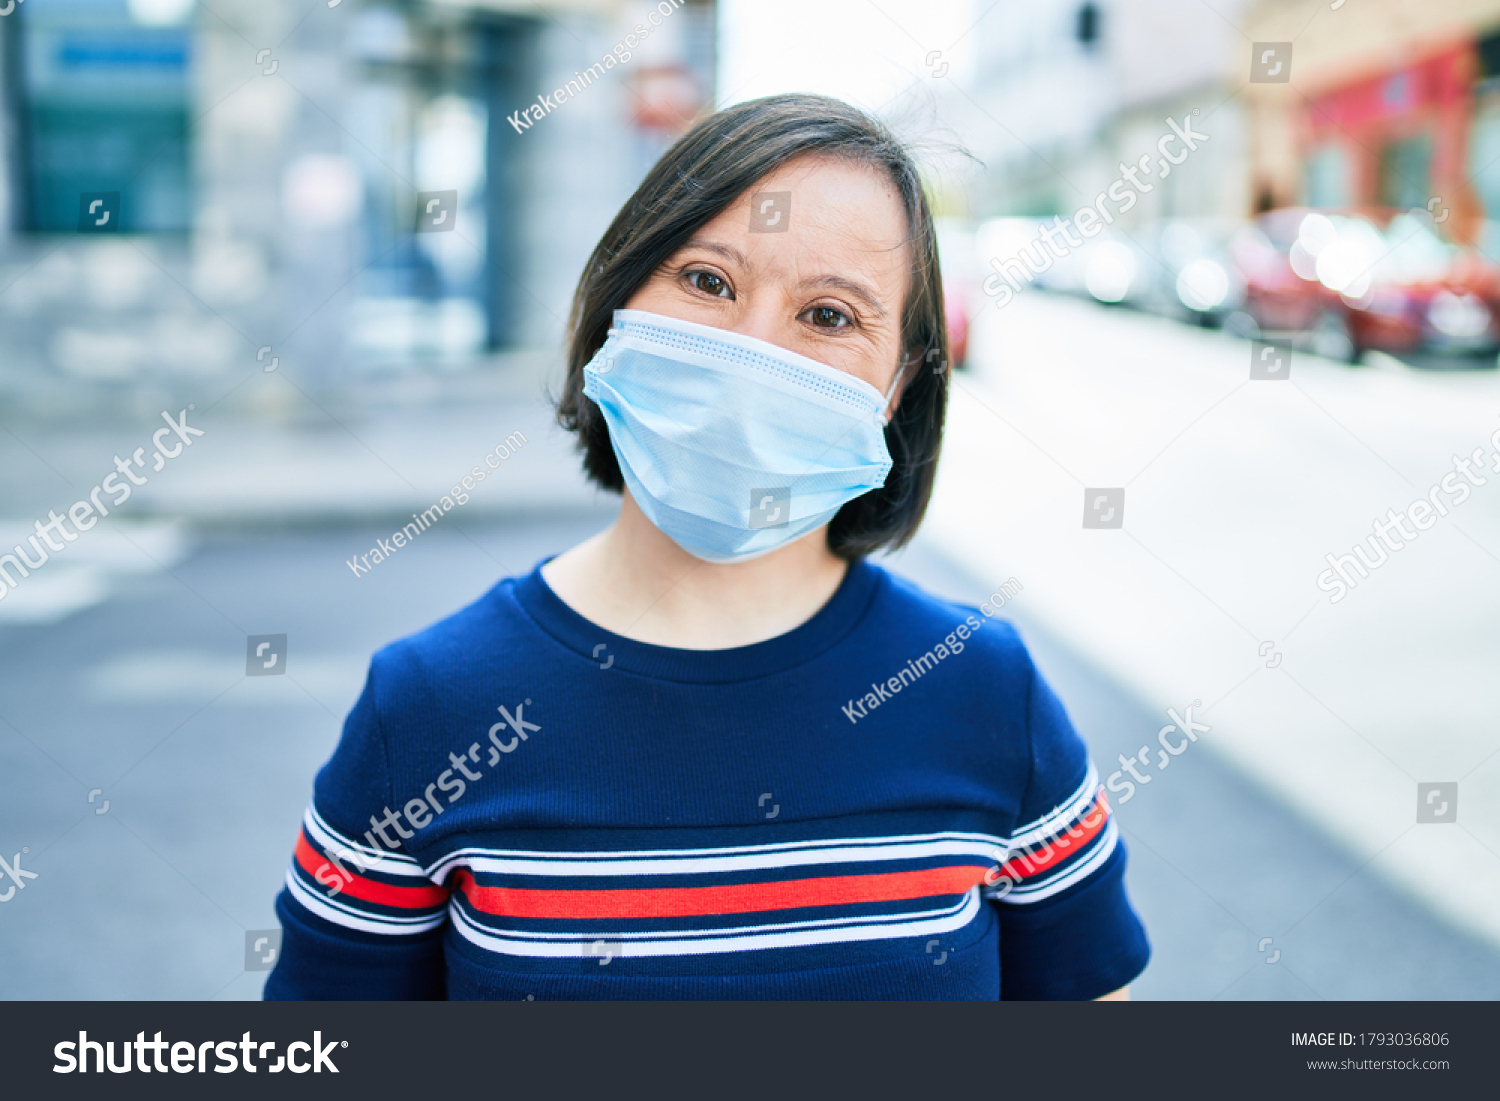 Beautiful brunette woman with down syndrome at the town on a sunny day wearing safety medical mask for coronavirus #1793036806